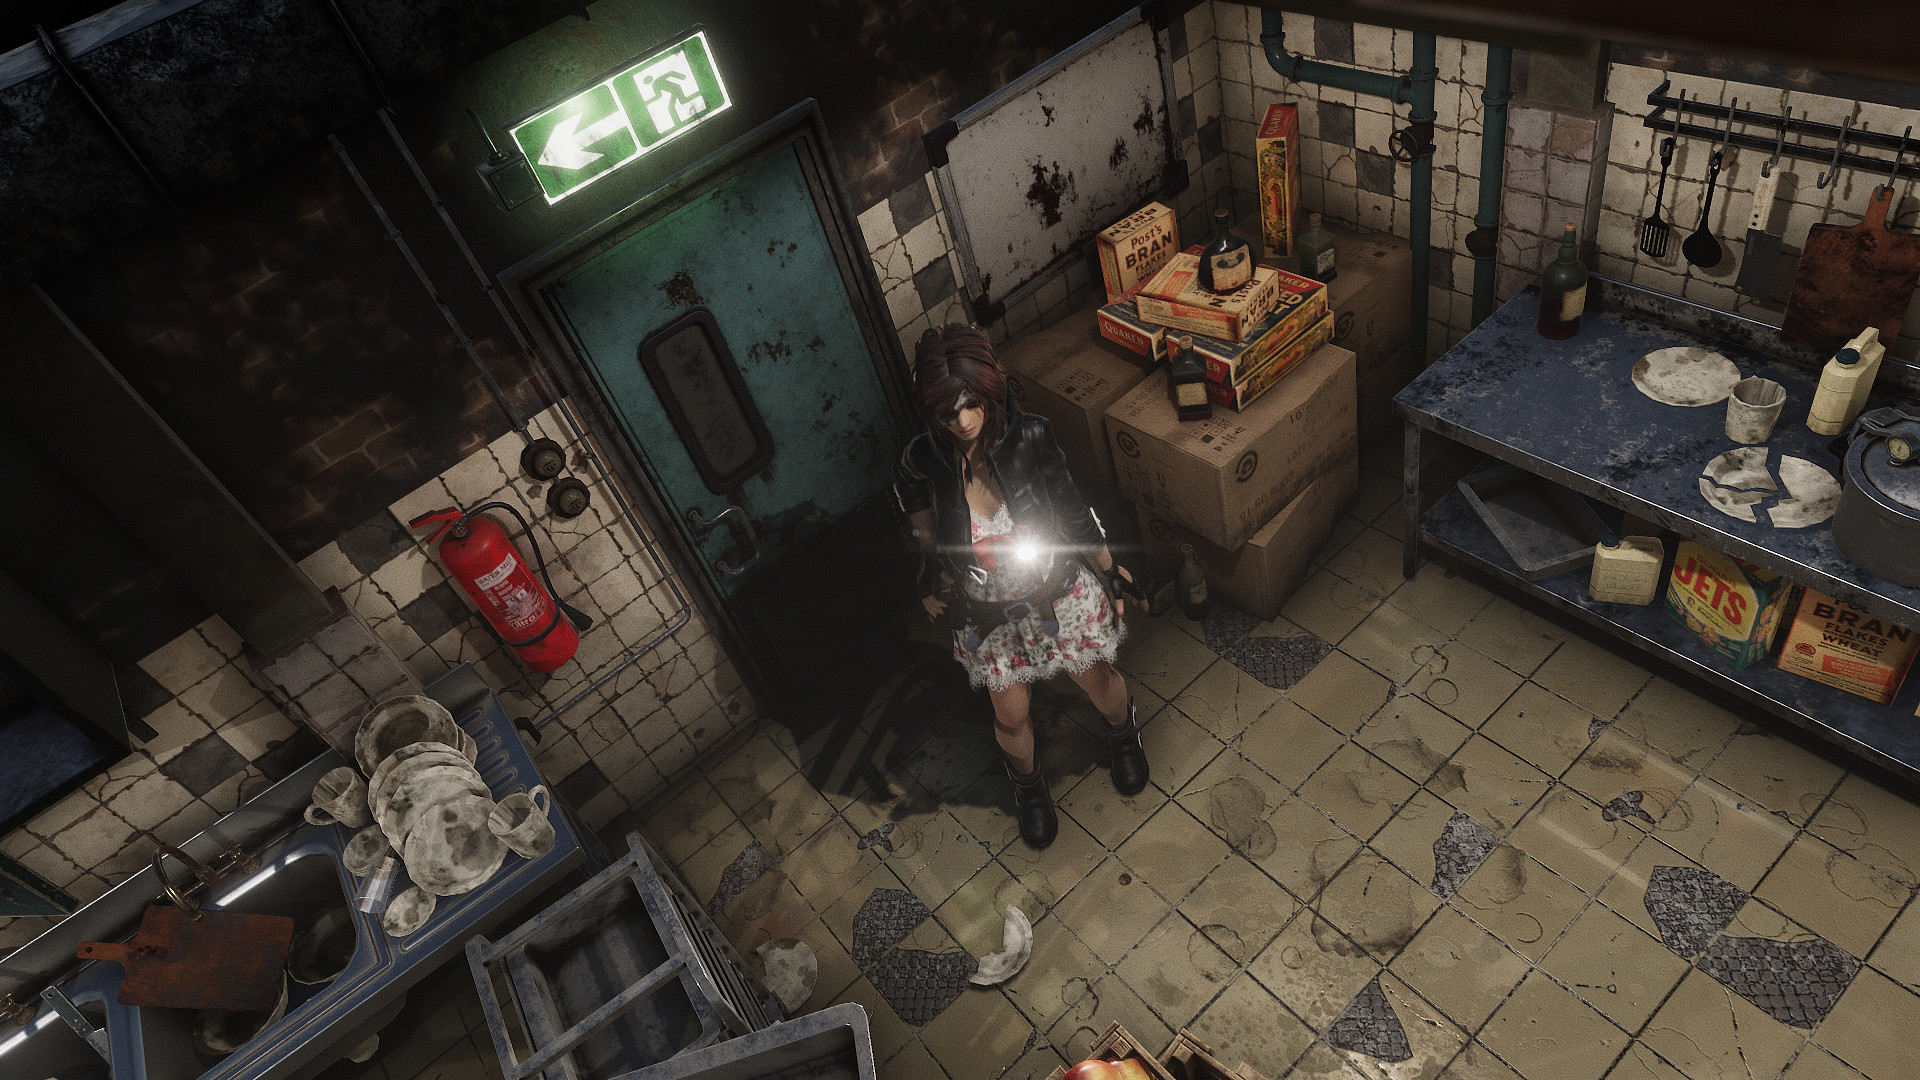 Tormented Souls Is A Survival Horror Experience Coming To Console And PC Sometime Next Year